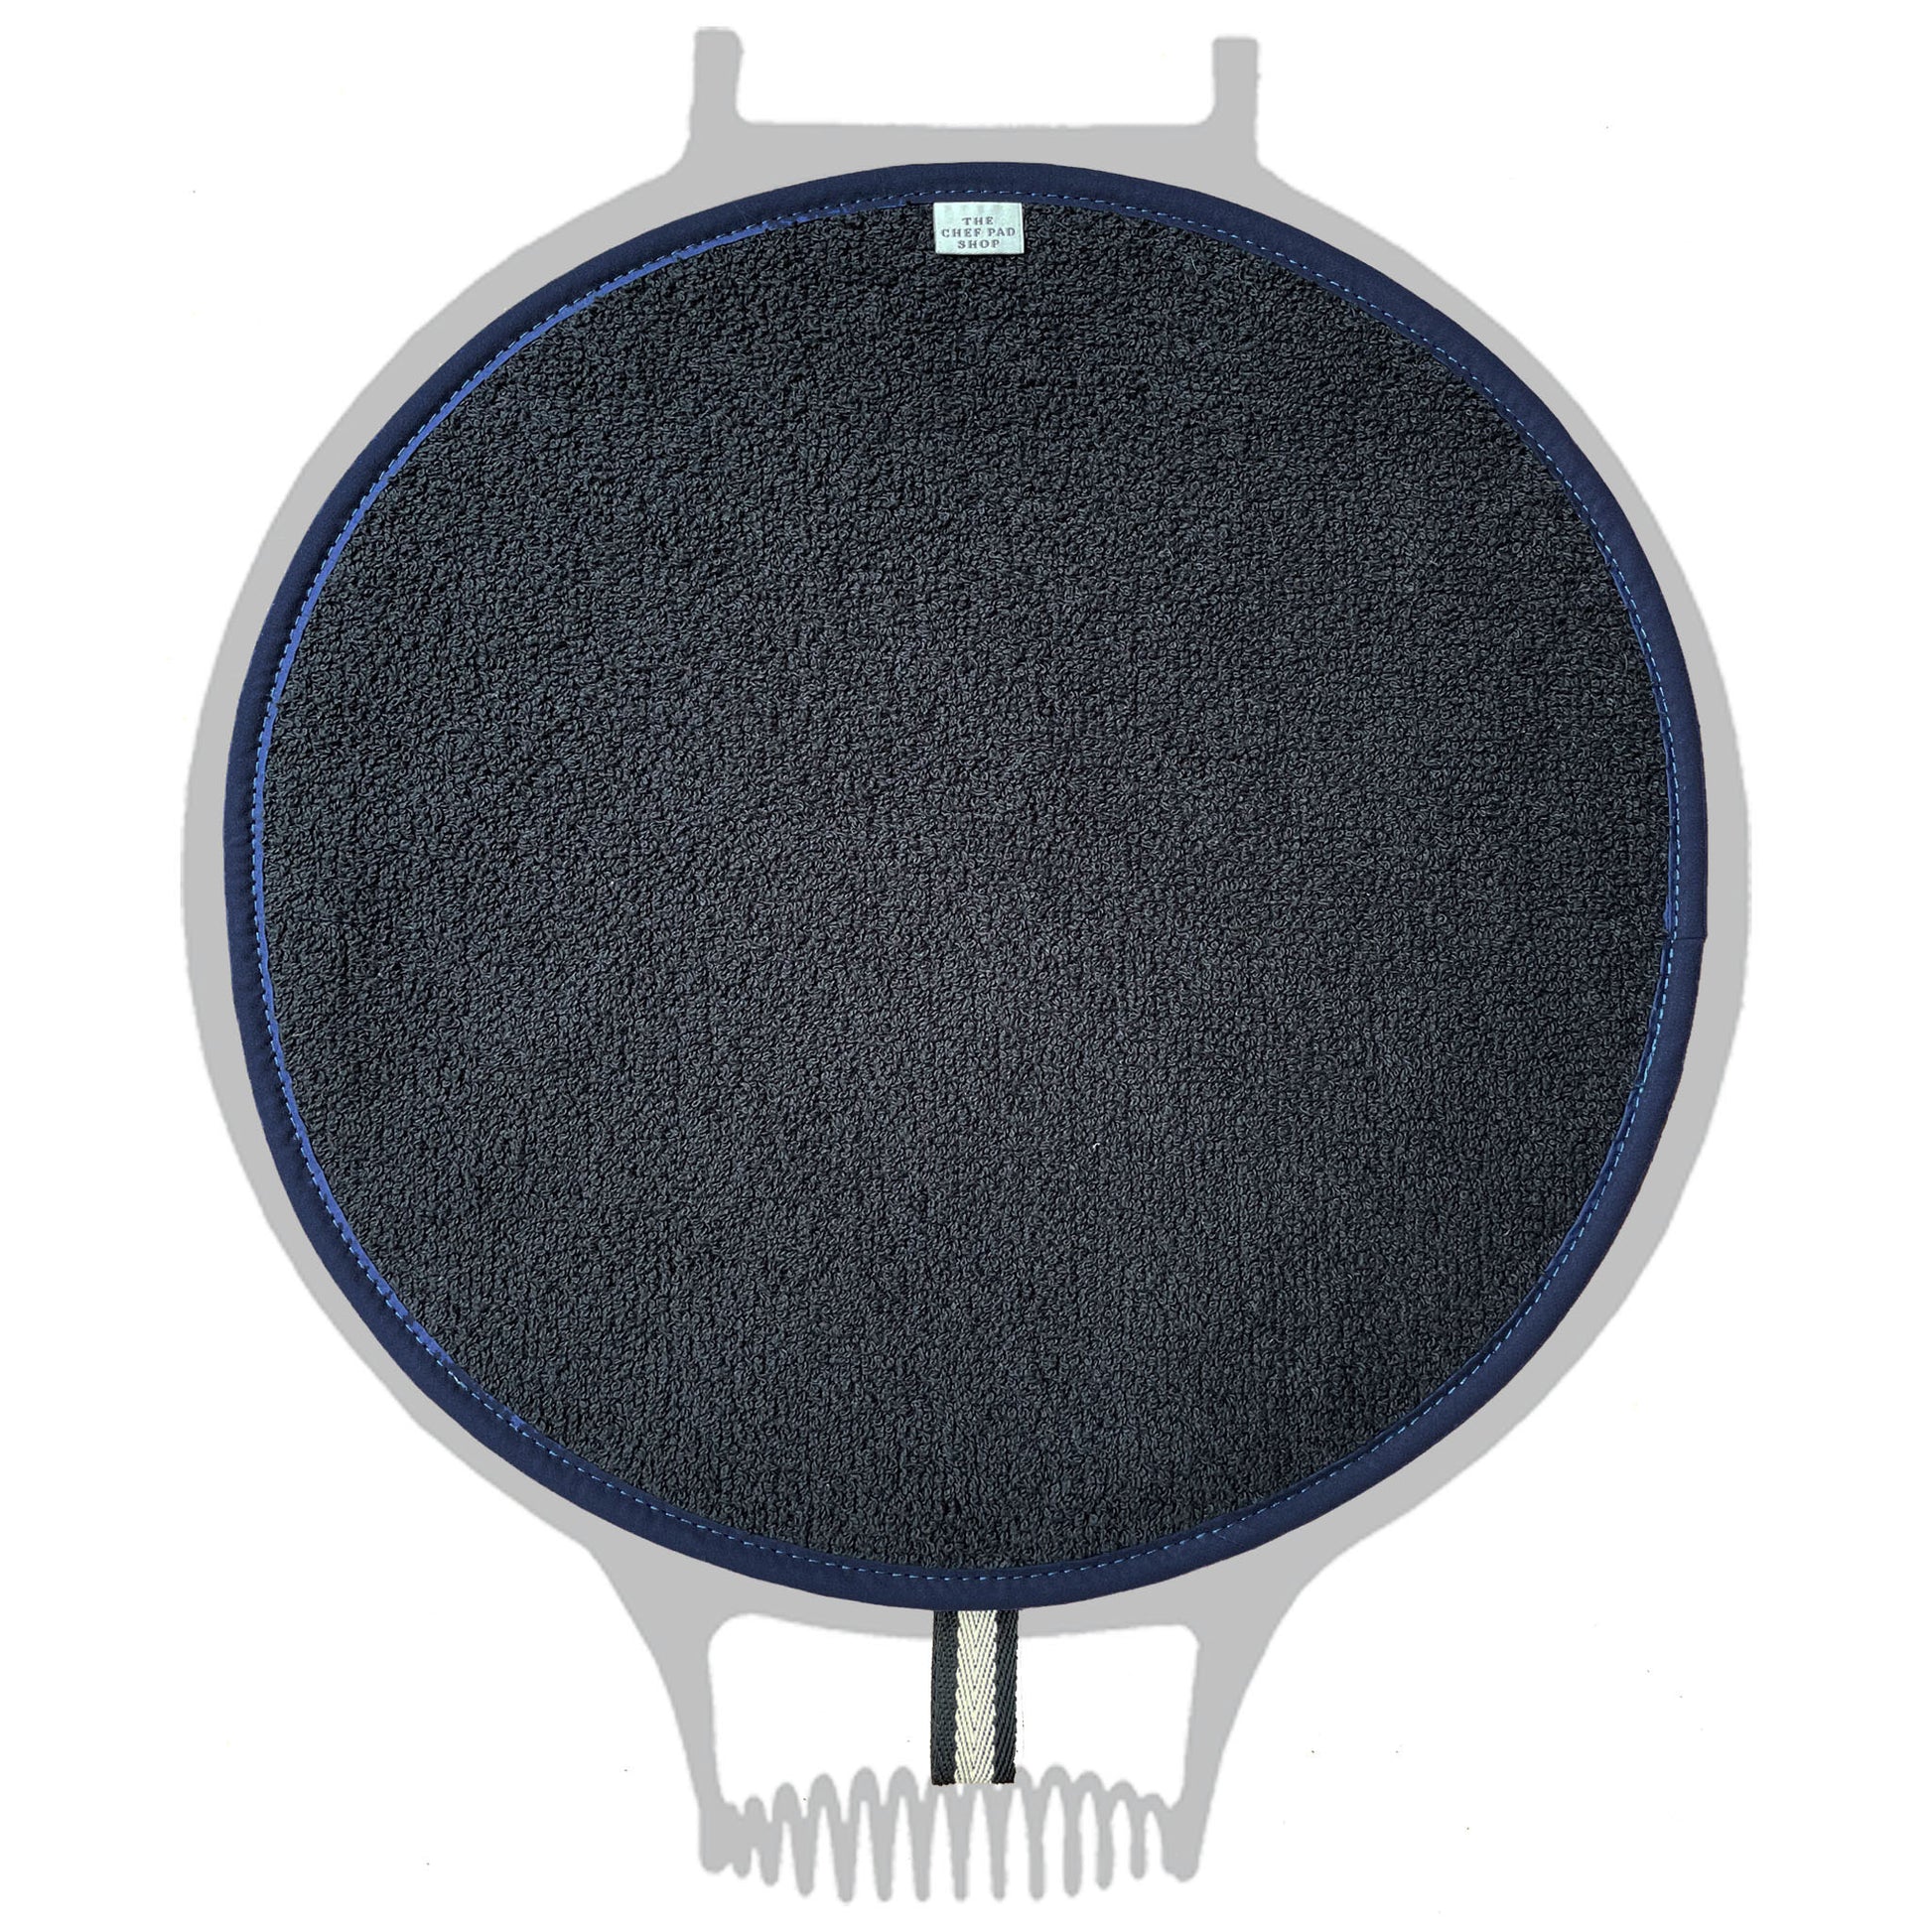 Chef Pad - Aga - The Chef Pad Shop - Insulate Range: Black & Cream Chefs Pad with Blue Binding For Use With Aga Cookers